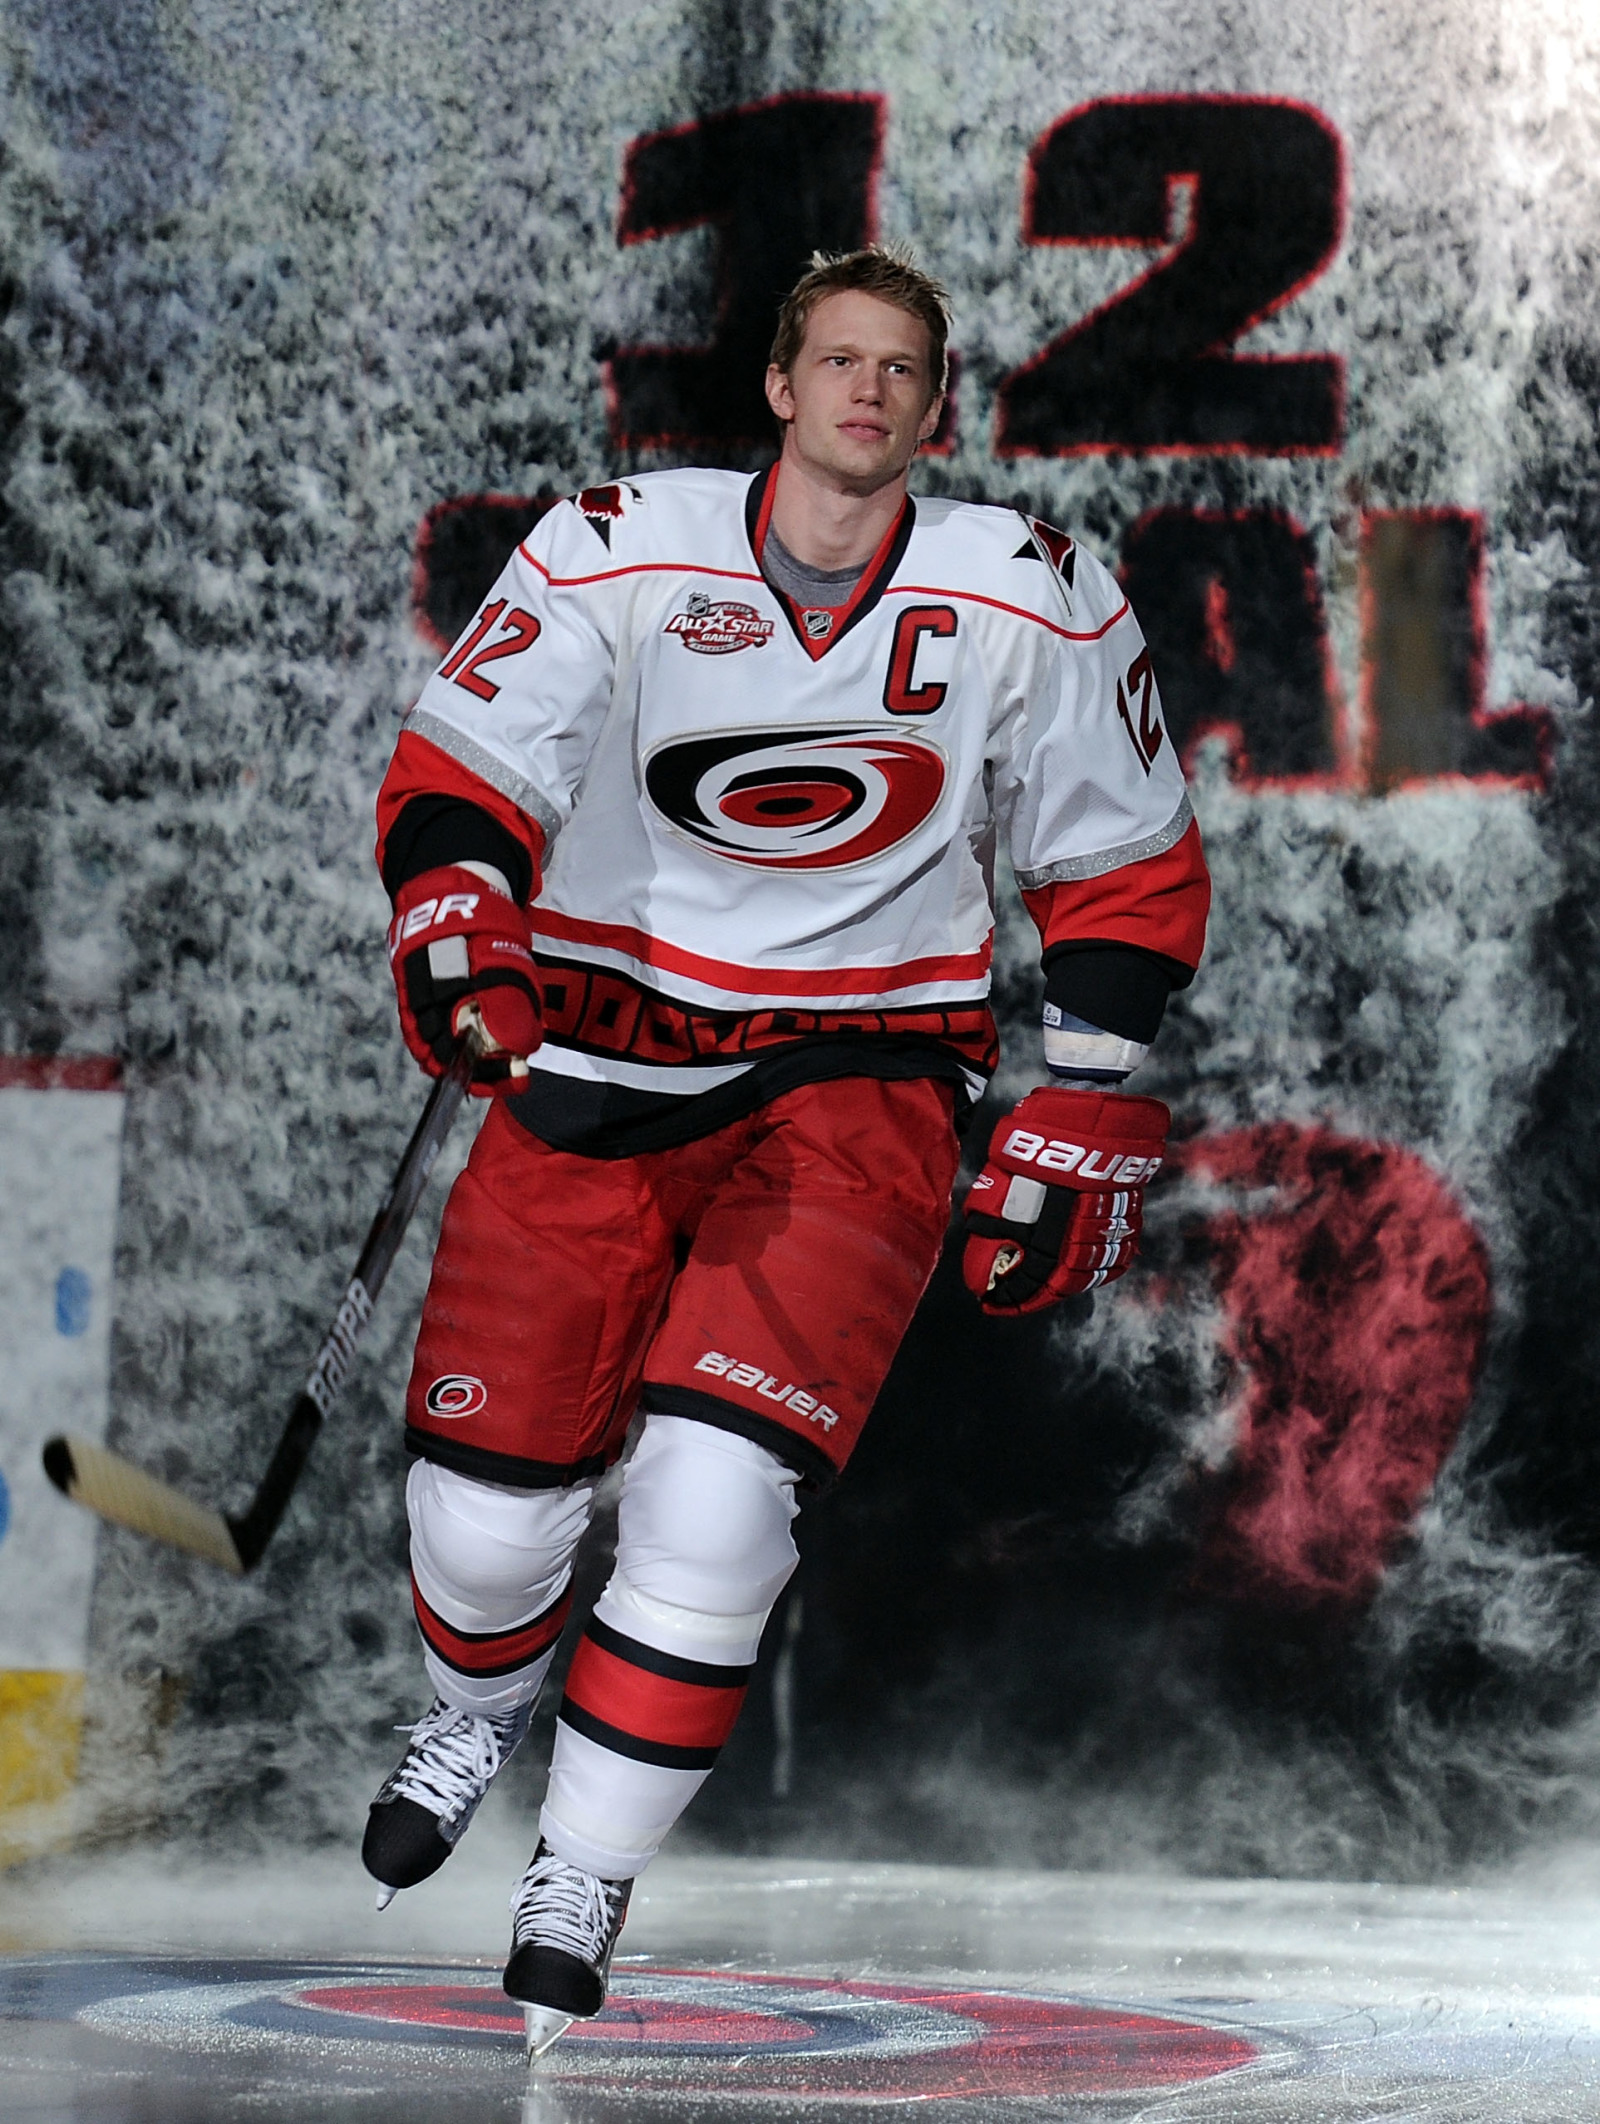 Should the Carolina Hurricanes Trade For Former Cane Eric Staal?